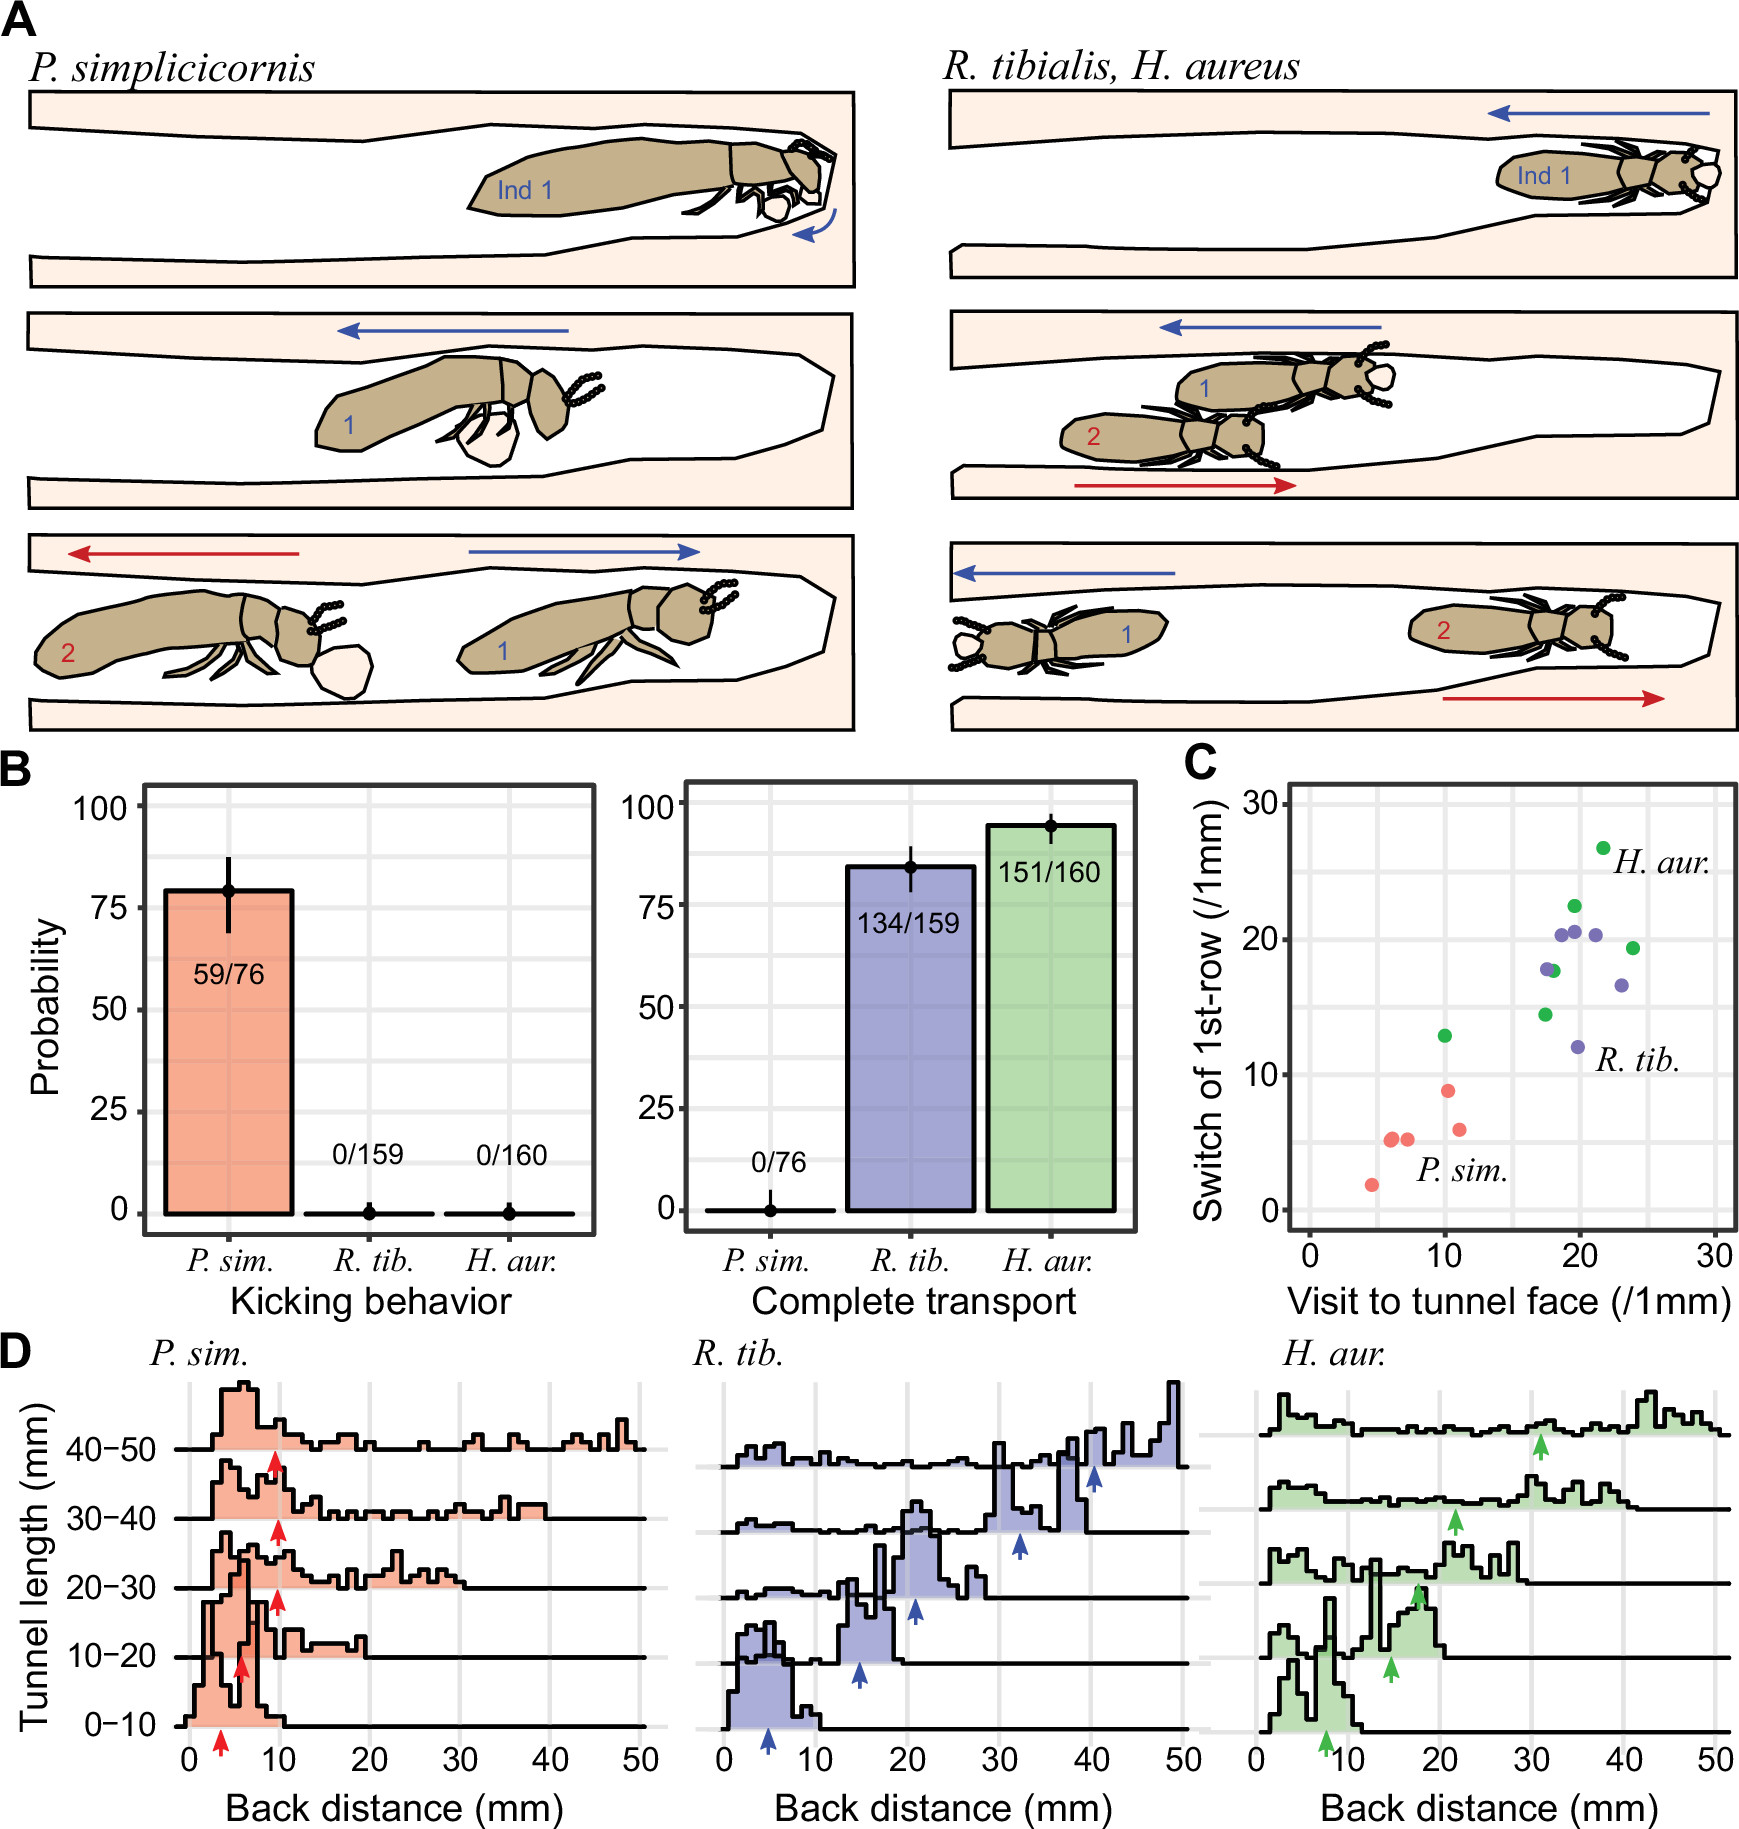 Complex Relationship between Tunneling Patterns and Individual Behaviors in Termites